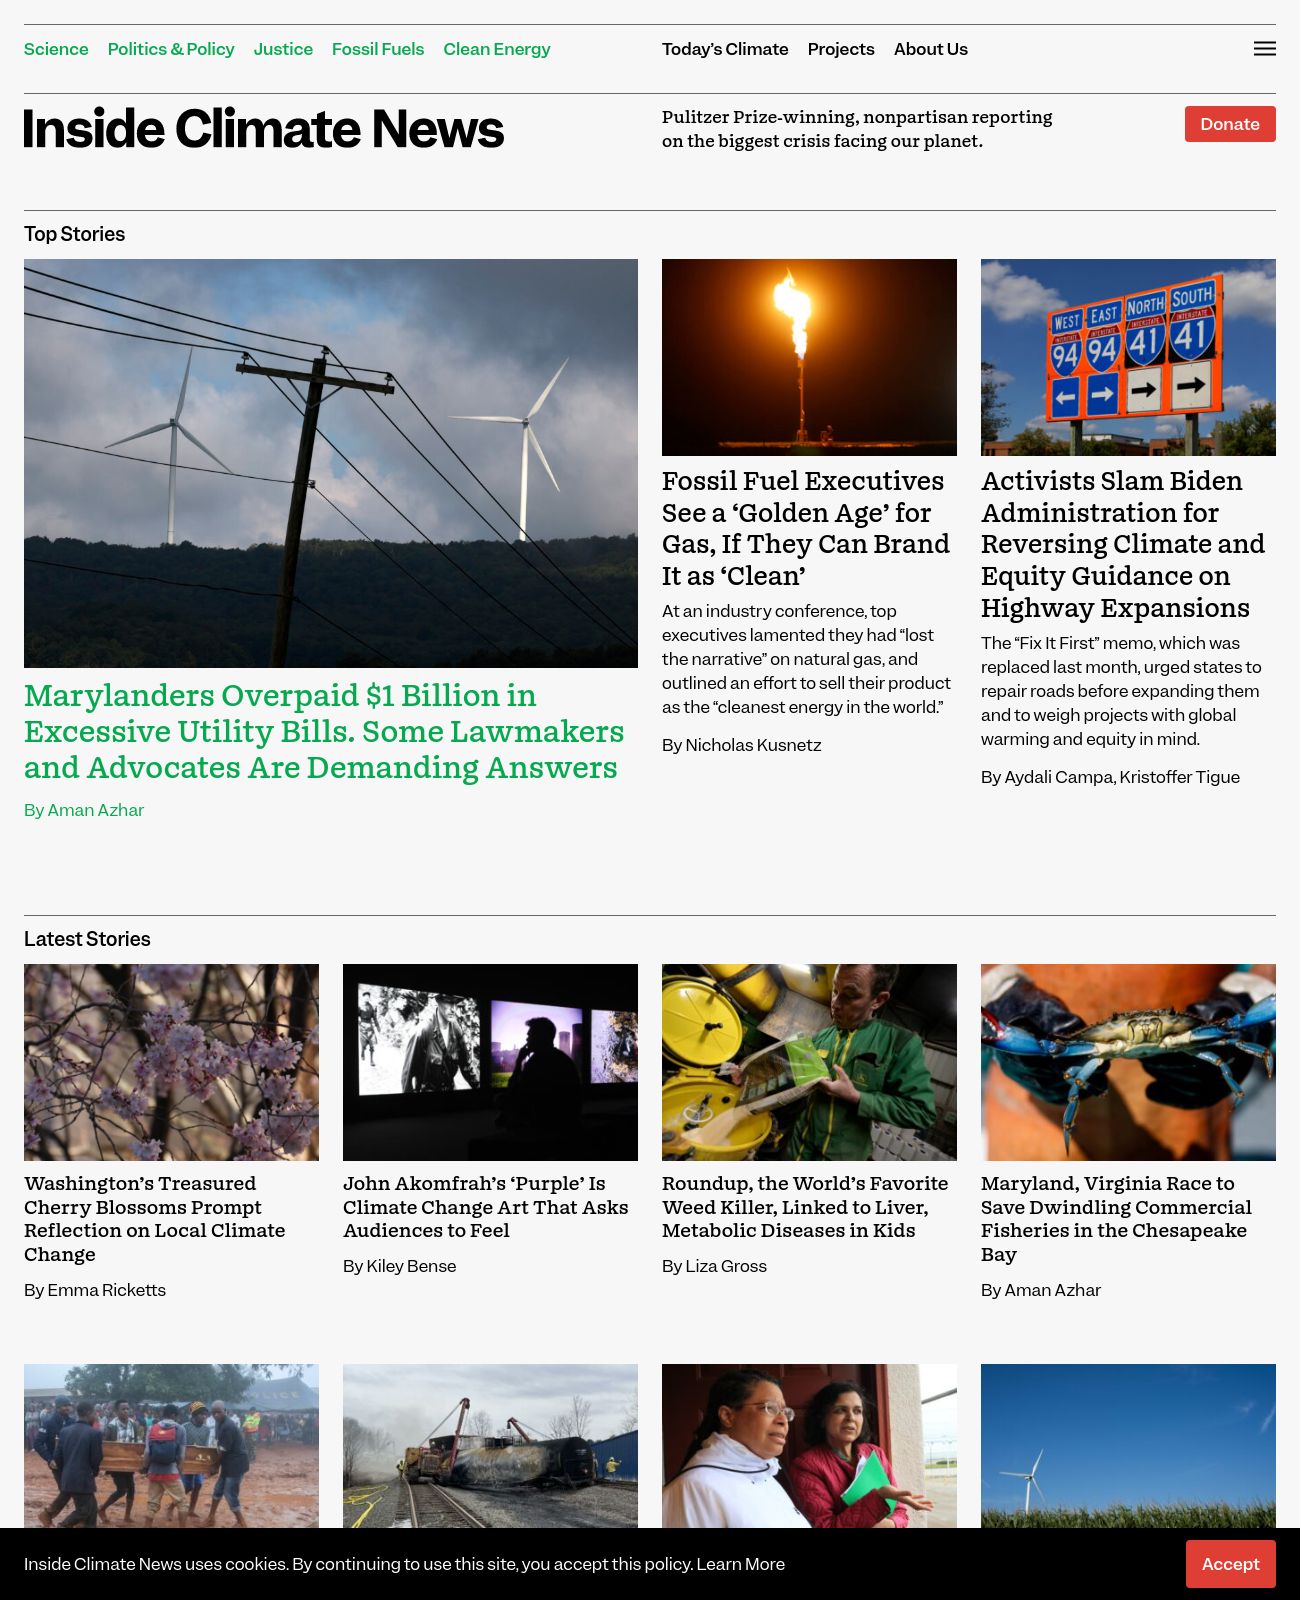 Inside Climate News at 2023-03-20 09:42:11-04:00 local time